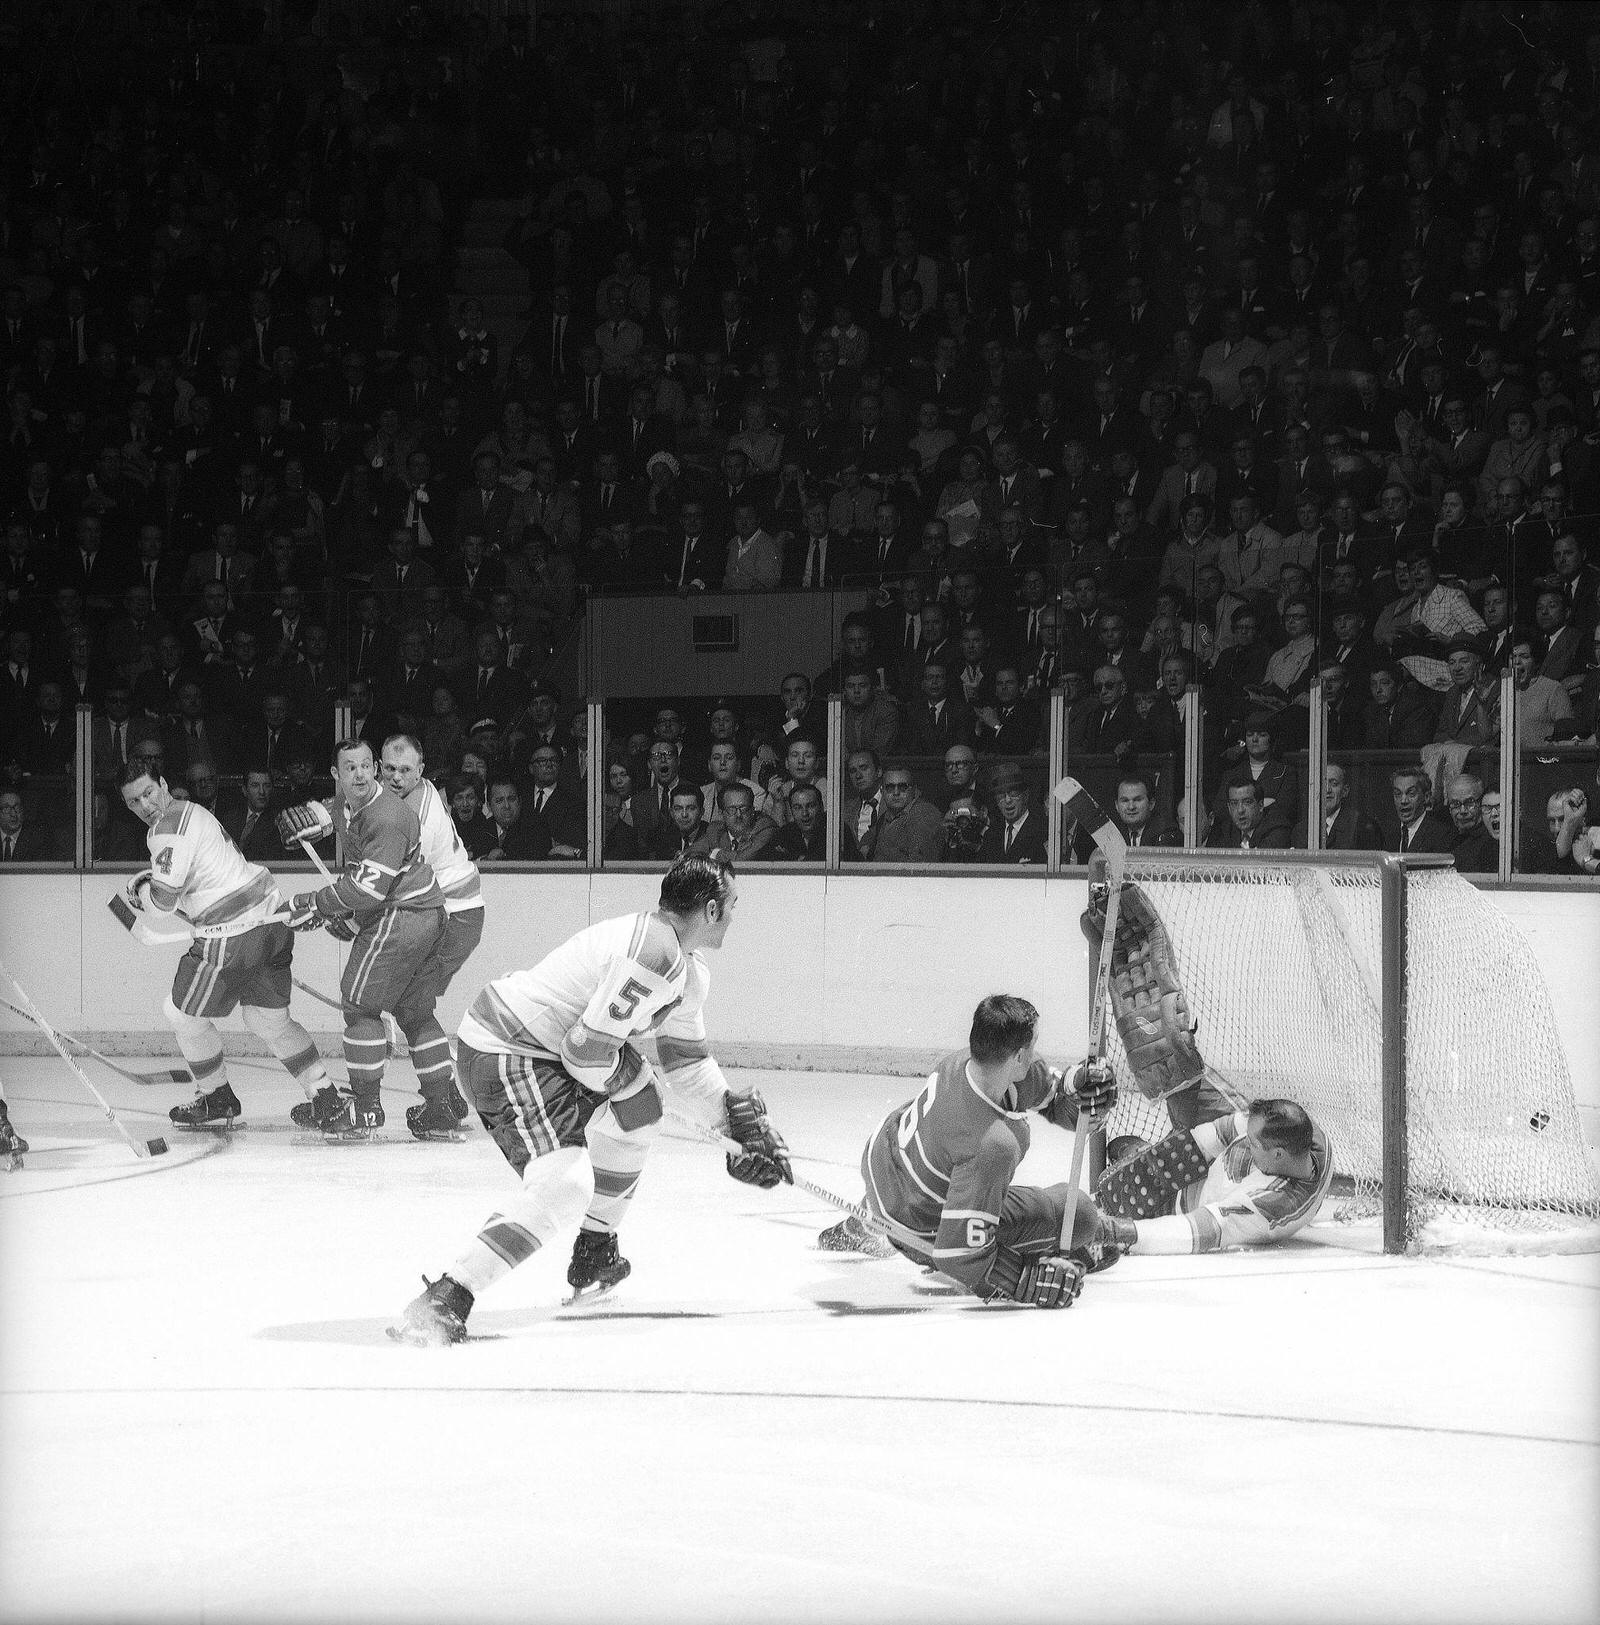 St. Louis Blues vs Montreal Canadiens, 1968 NHL Stanley Cup Finals